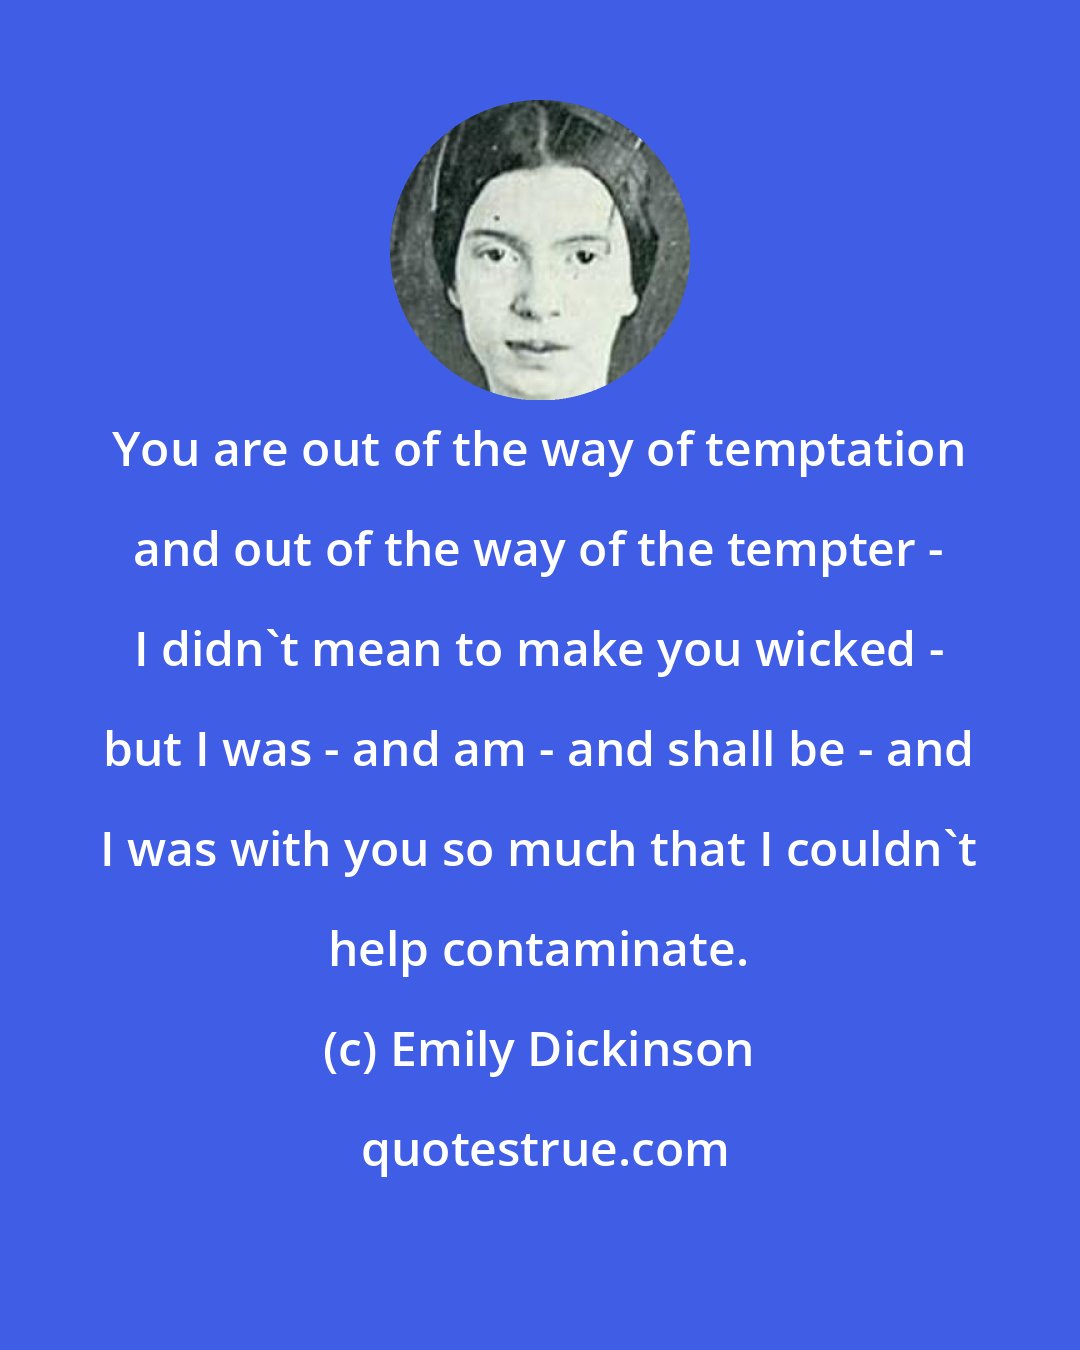 Emily Dickinson: You are out of the way of temptation and out of the way of the tempter - I didn't mean to make you wicked - but I was - and am - and shall be - and I was with you so much that I couldn't help contaminate.